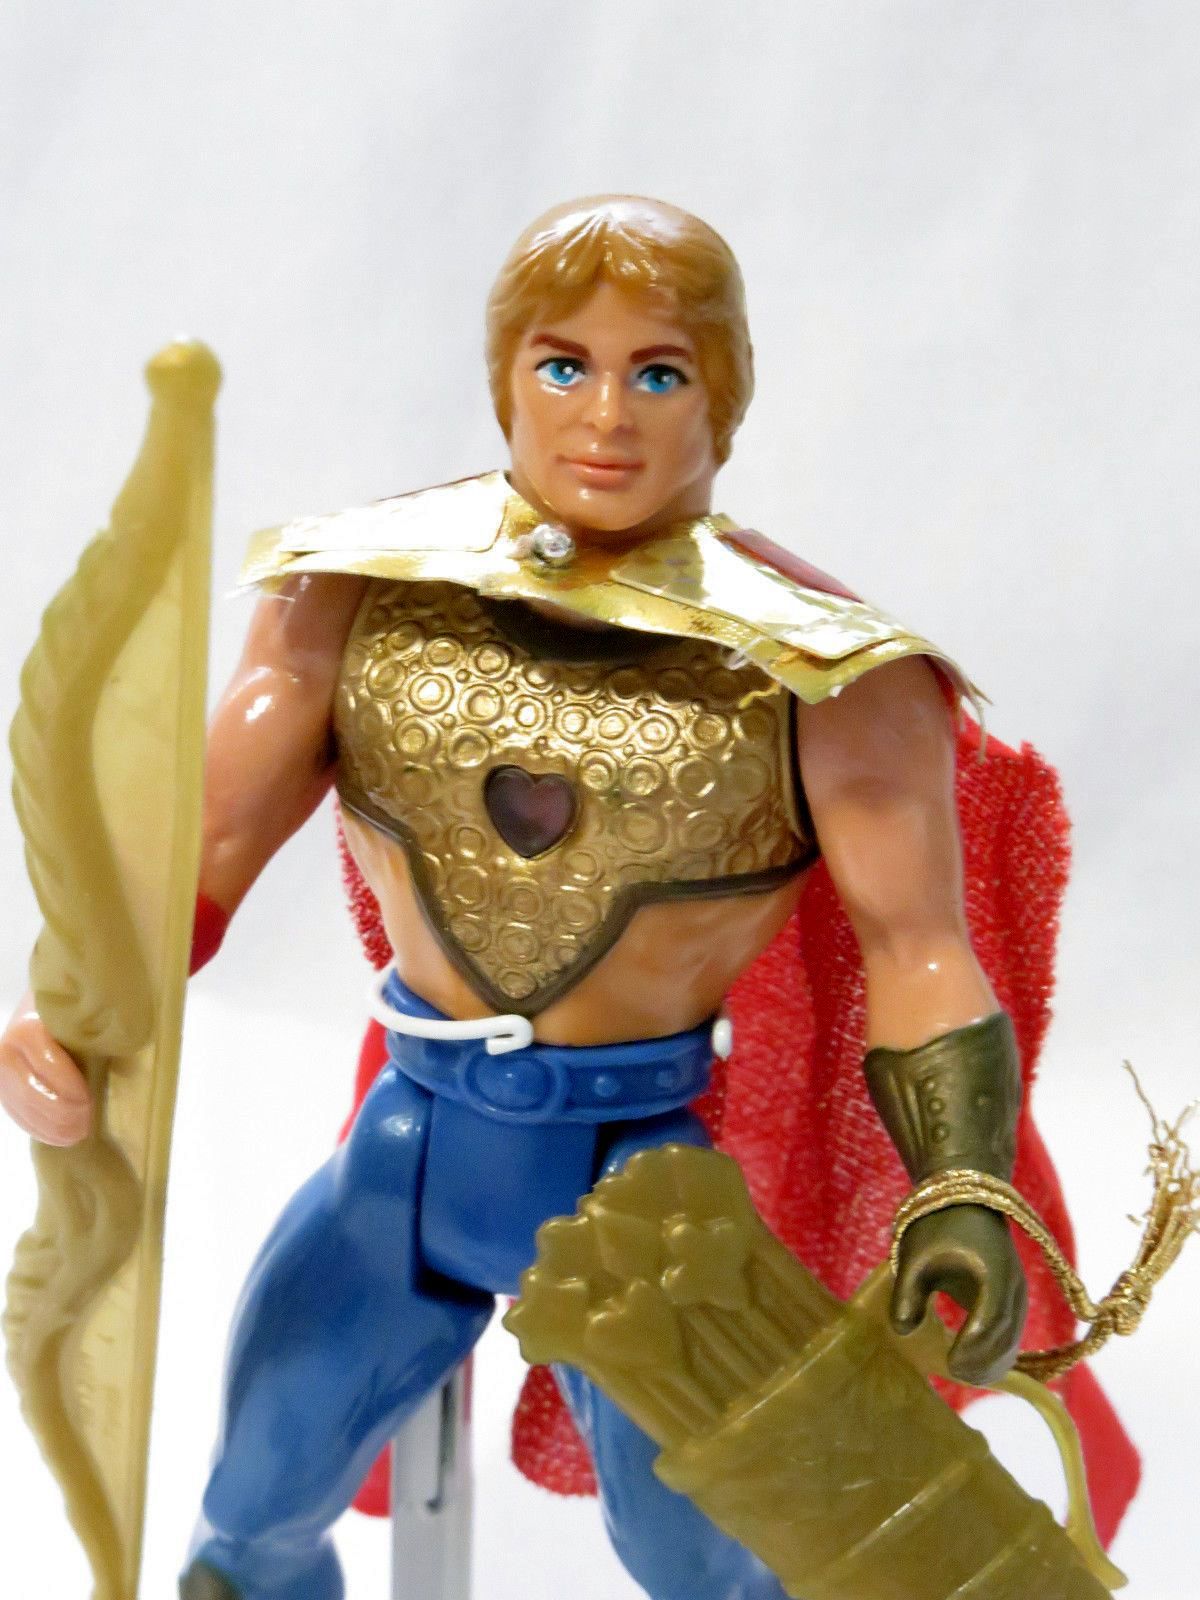 She-Ra: Princess of Power (1985) - (figures, dolls, toys and objects) 6